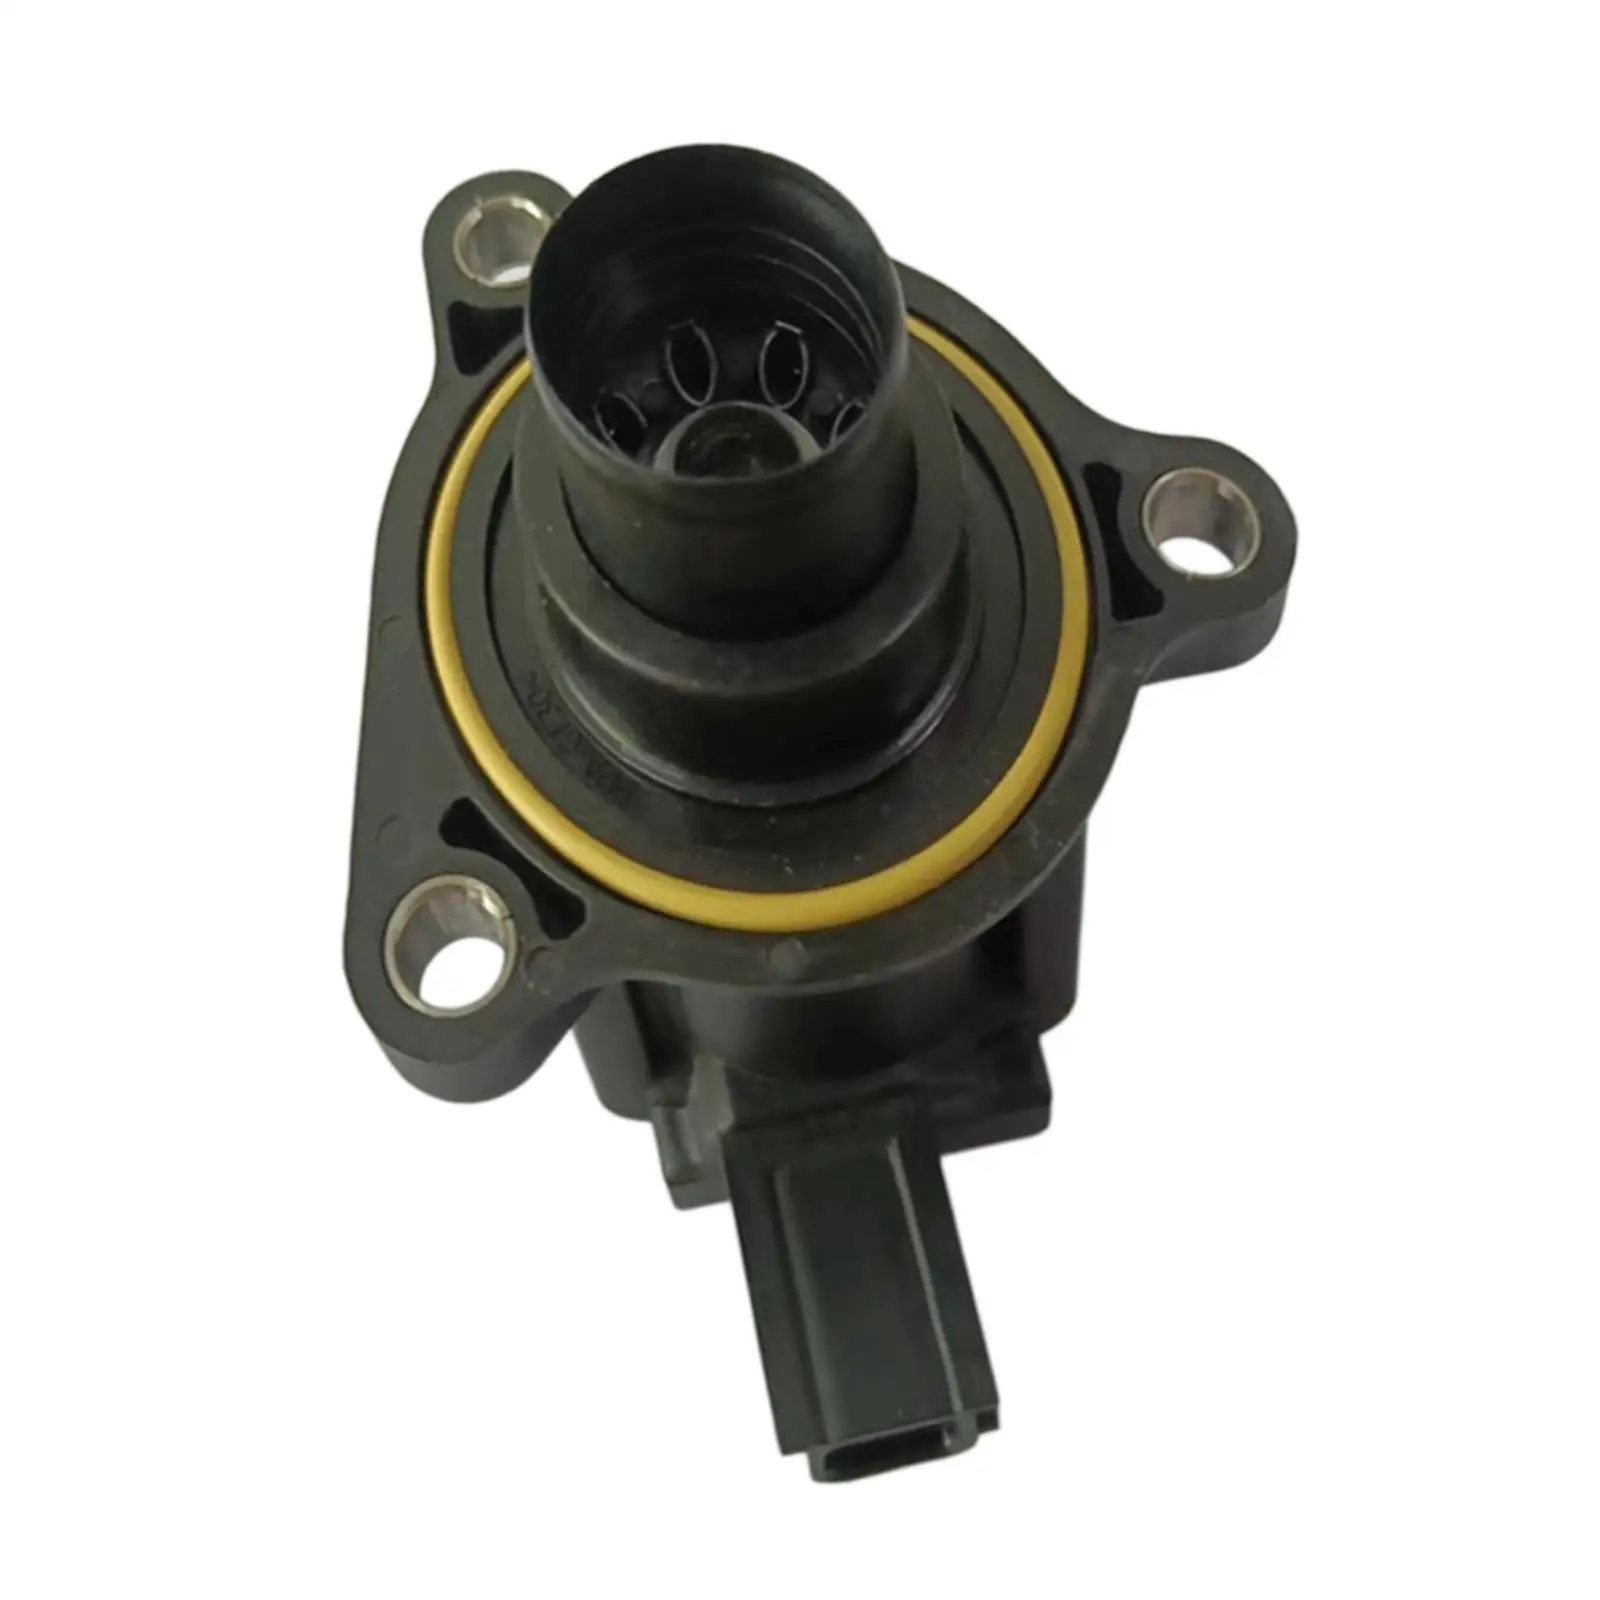 Turbocharger Solenoid Valve Direct Replaces for Renault 1.2 Models